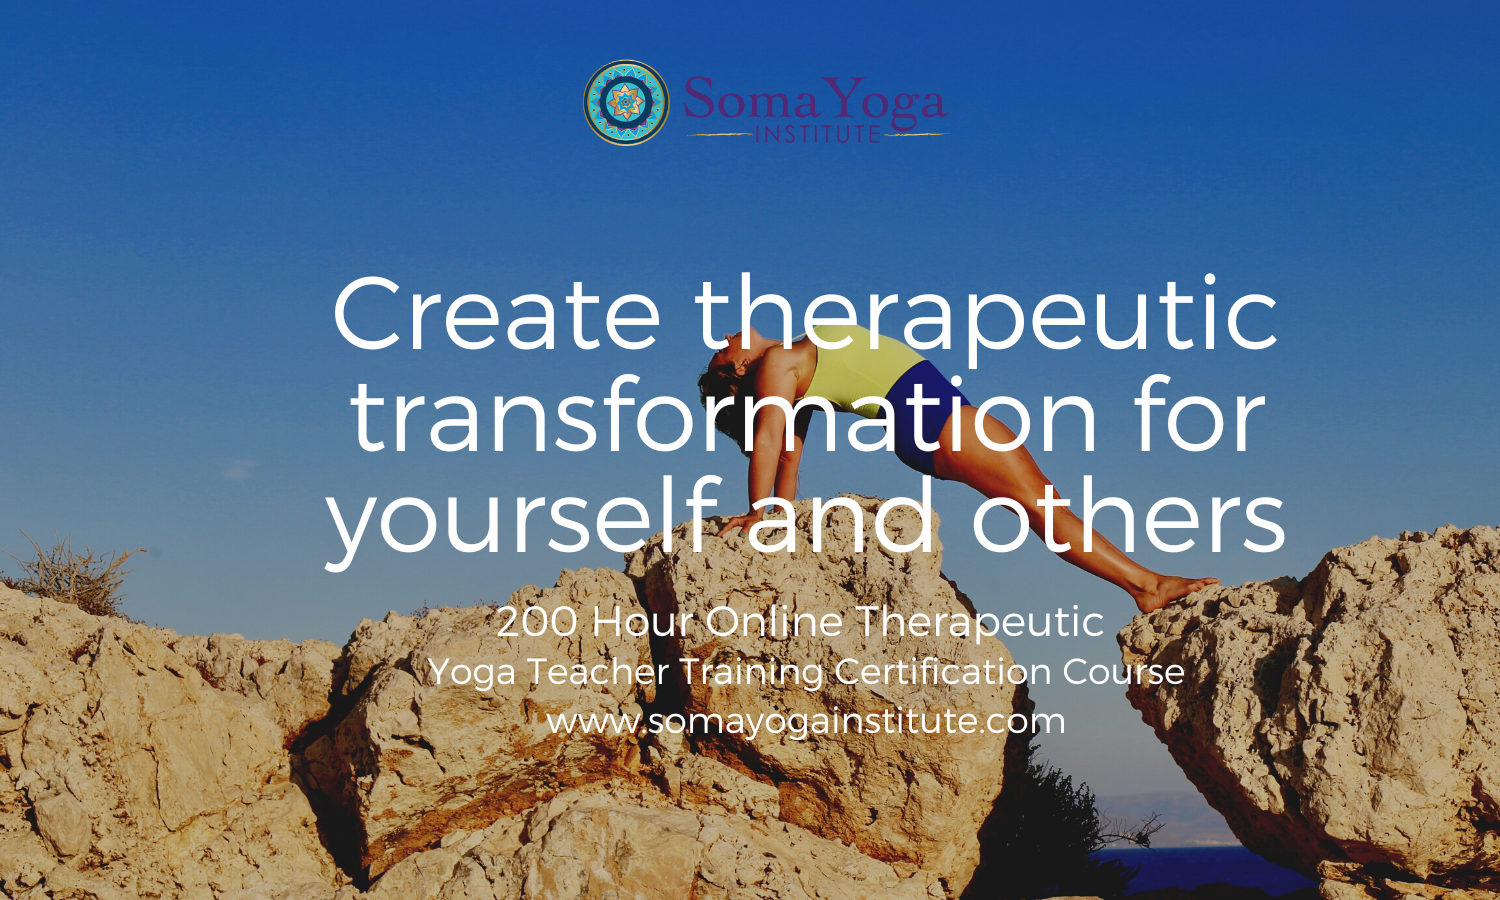 Online Yoga Teacher Training instructed by C-IAYT Yoga Therapists